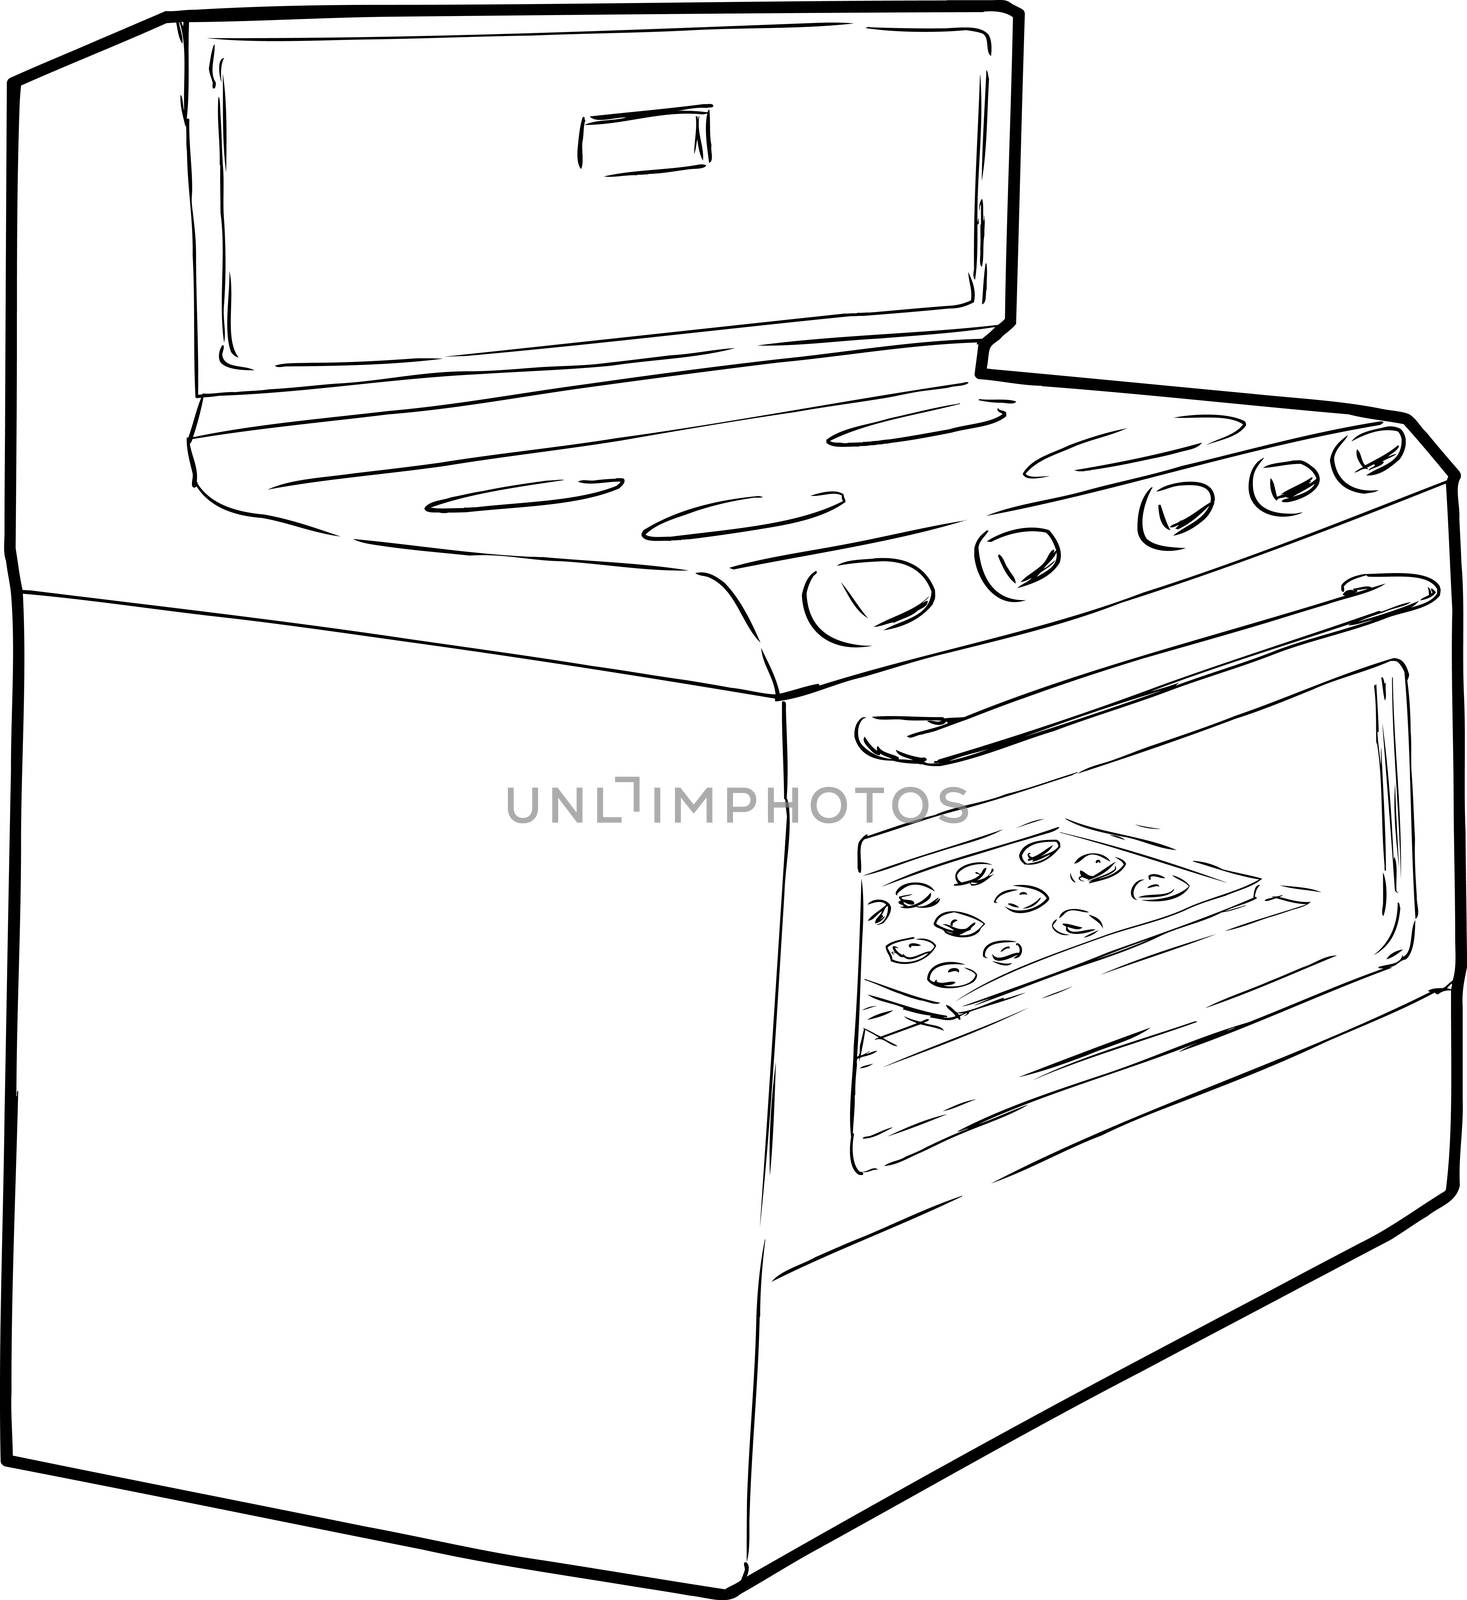 Single Oven with Cookies Inside by TheBlackRhino